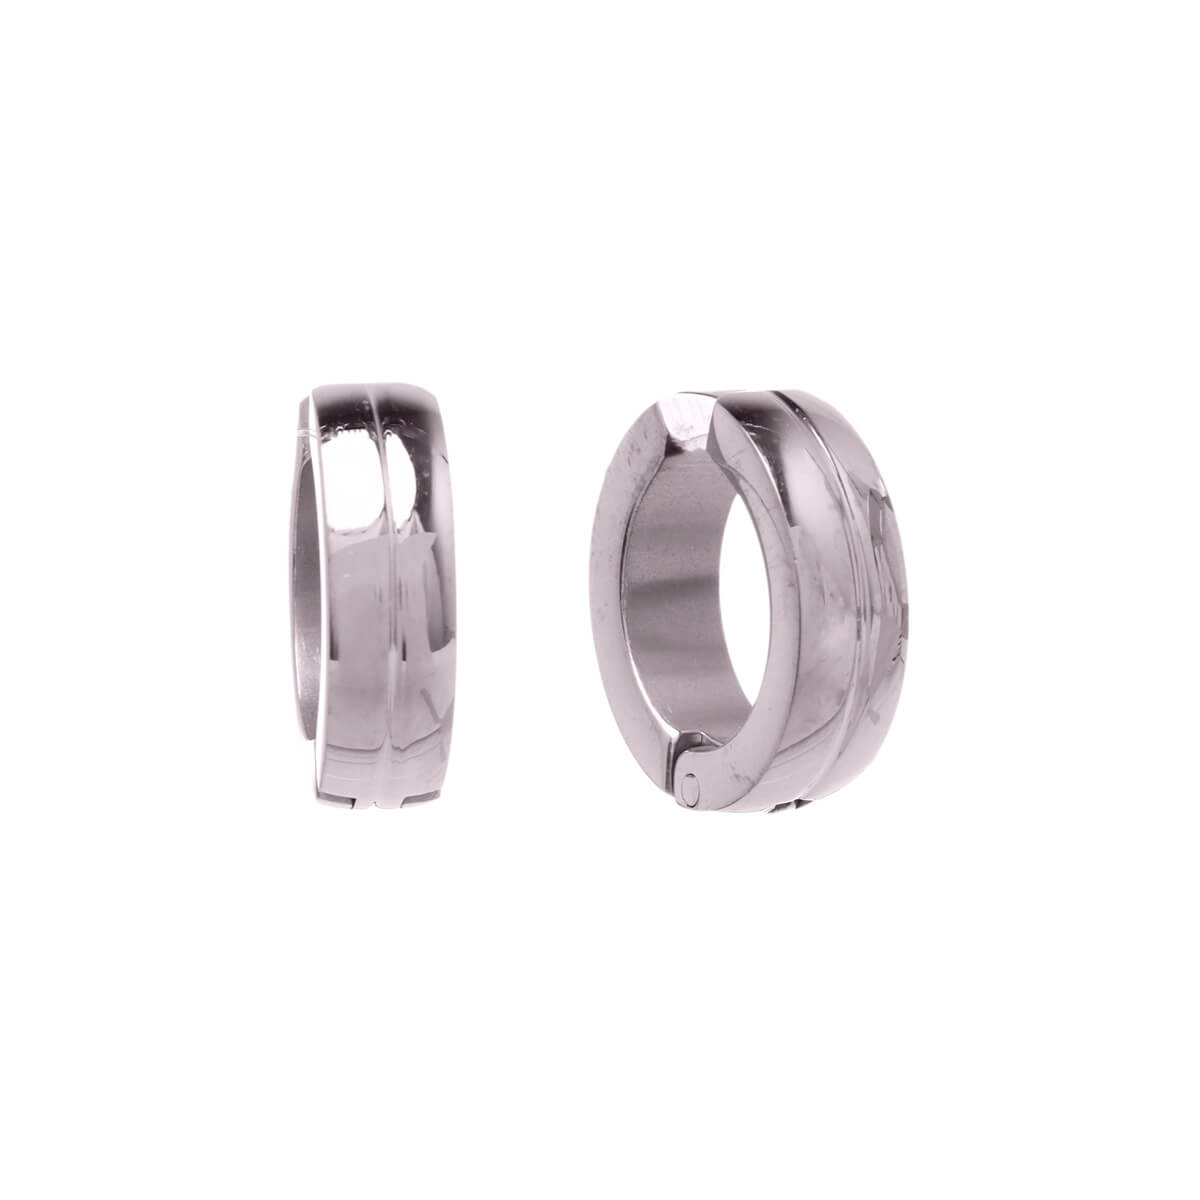 Curved ring clip earrings 4mm (Steel 316L)